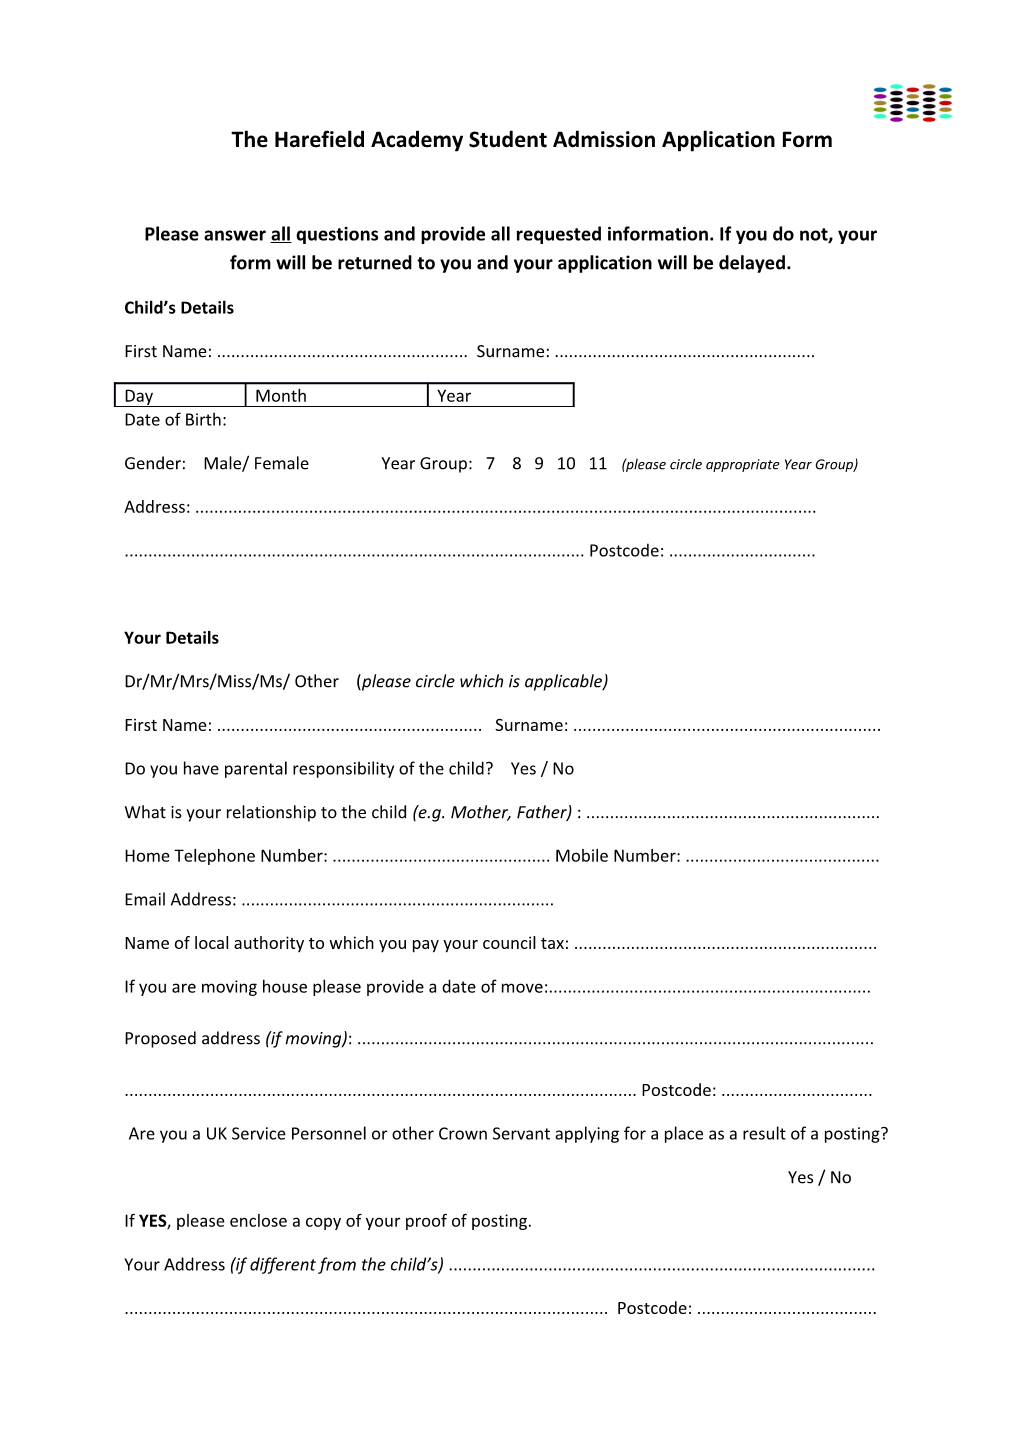 The Harefield Academy Student Admission Application Form